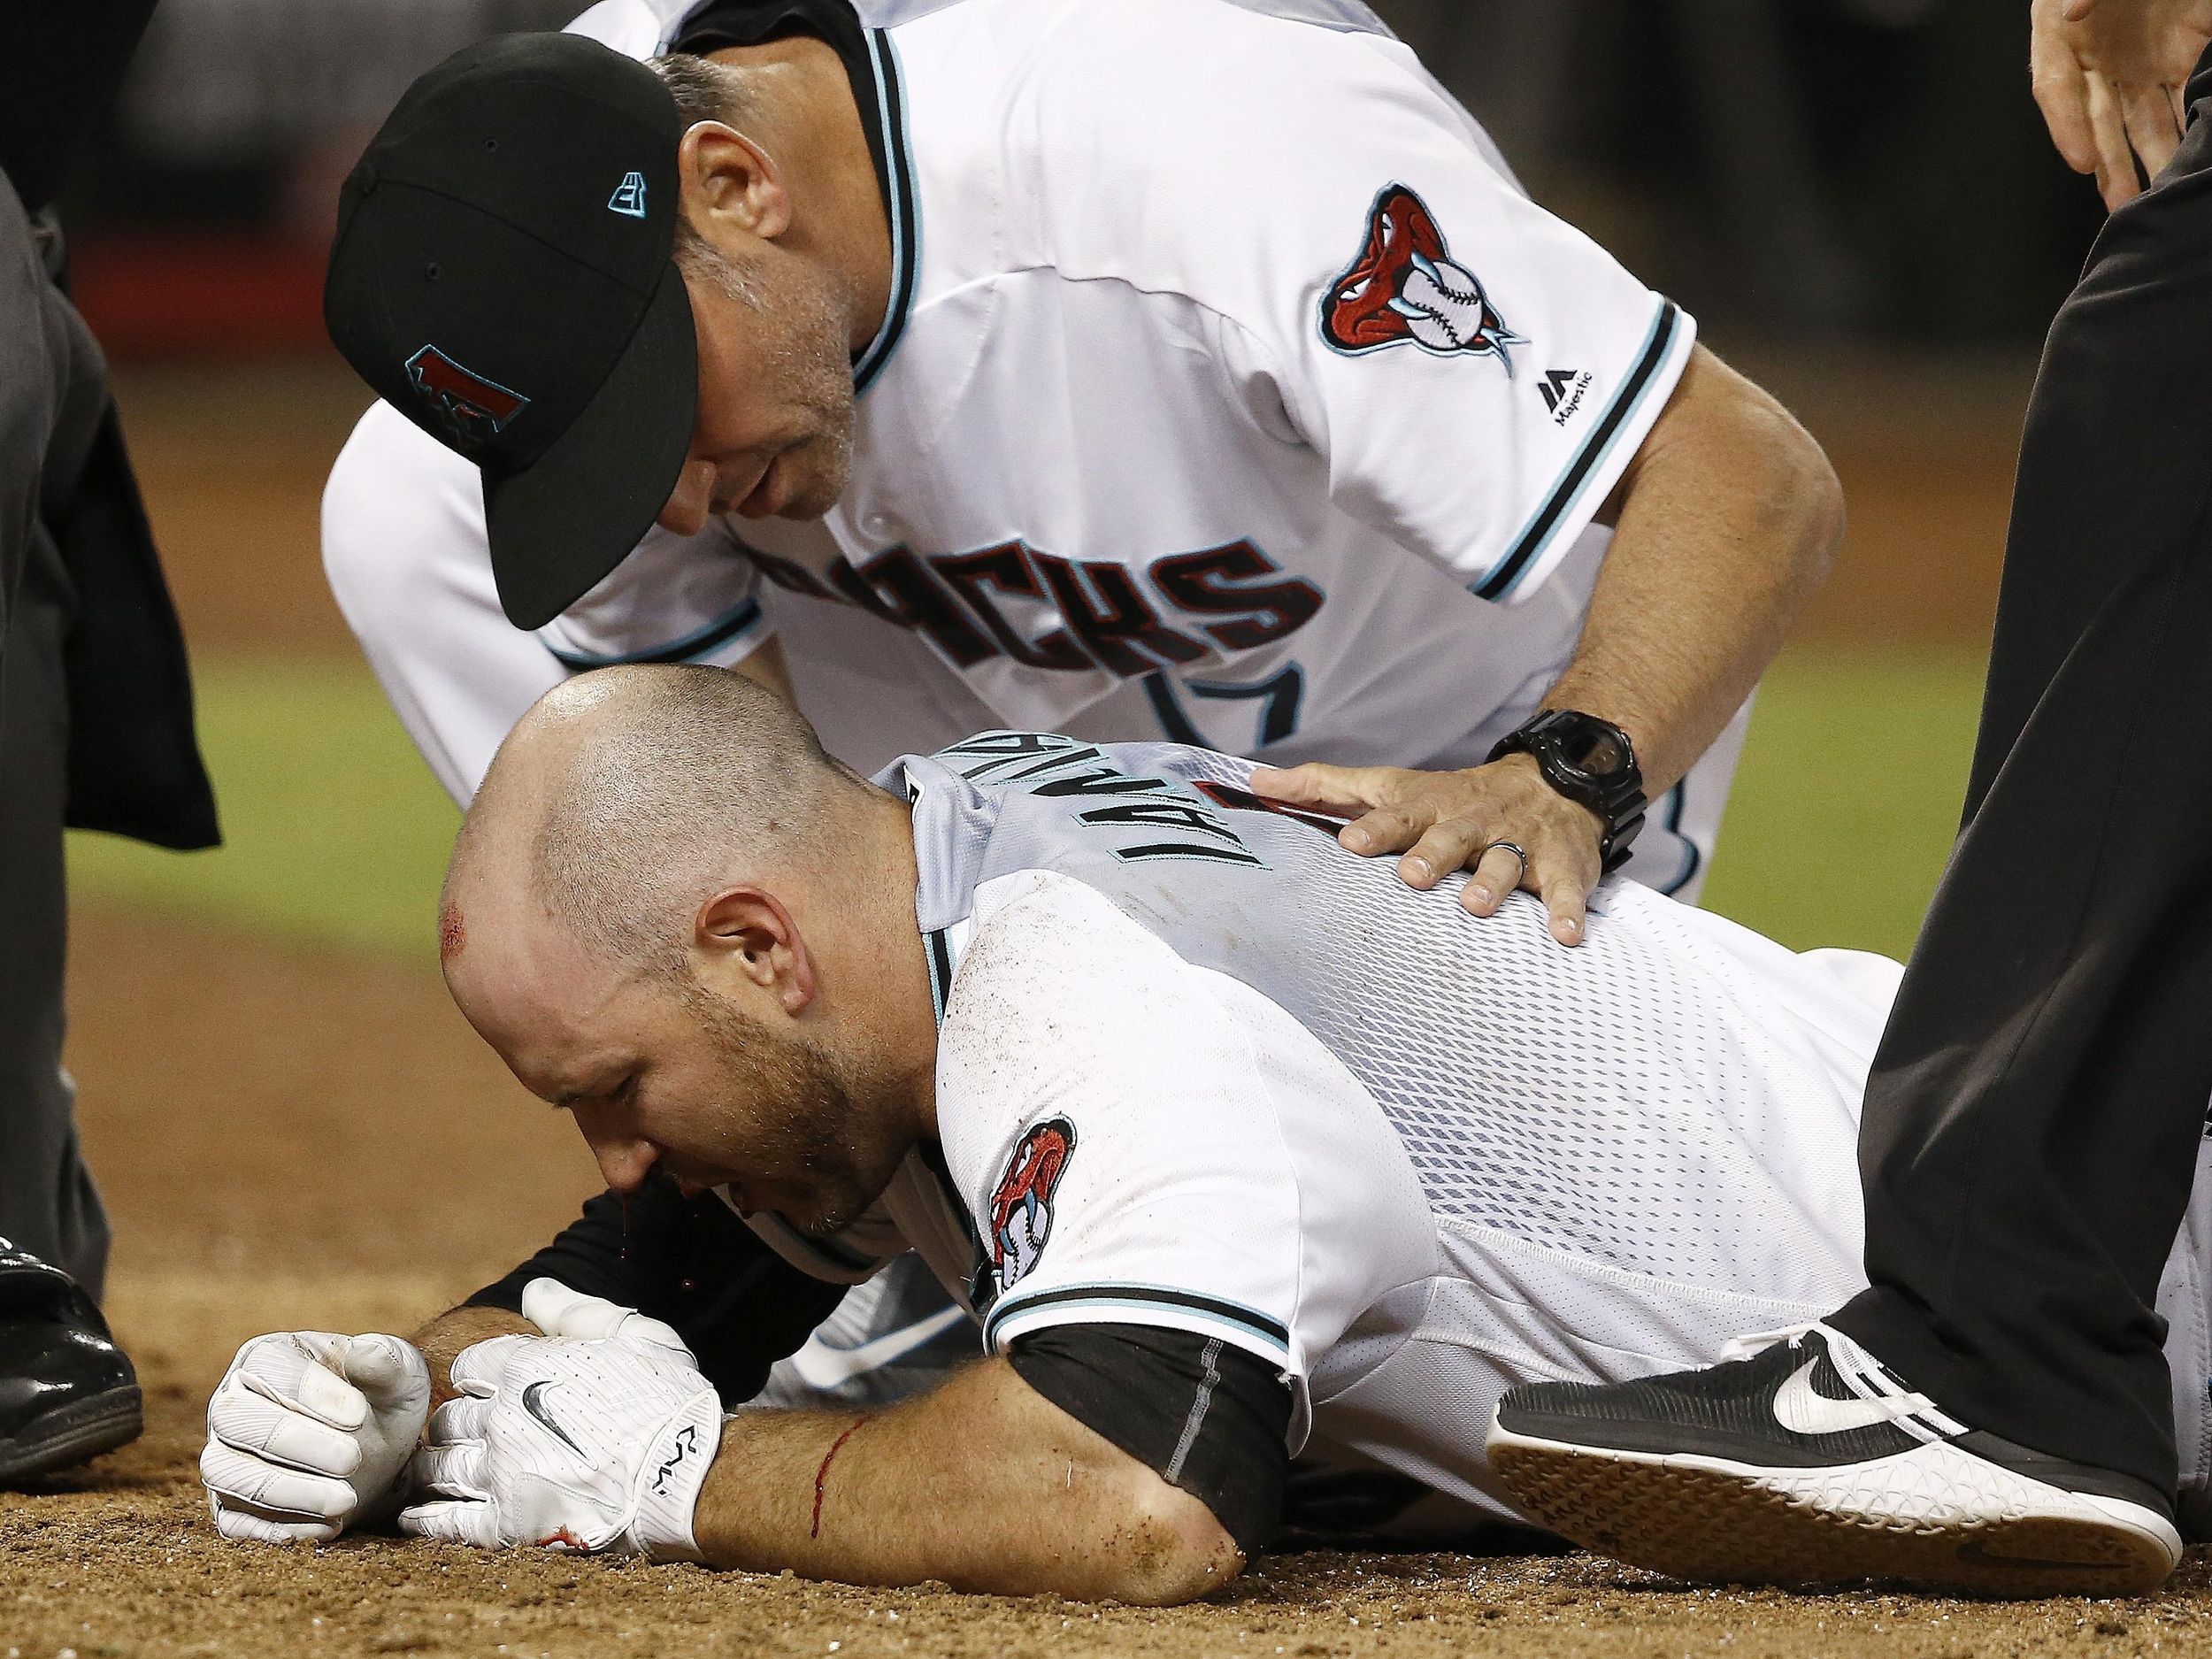 Diamondbacks' Chris Iannetta sent to hospital after getting hit in mouth by  pitch 